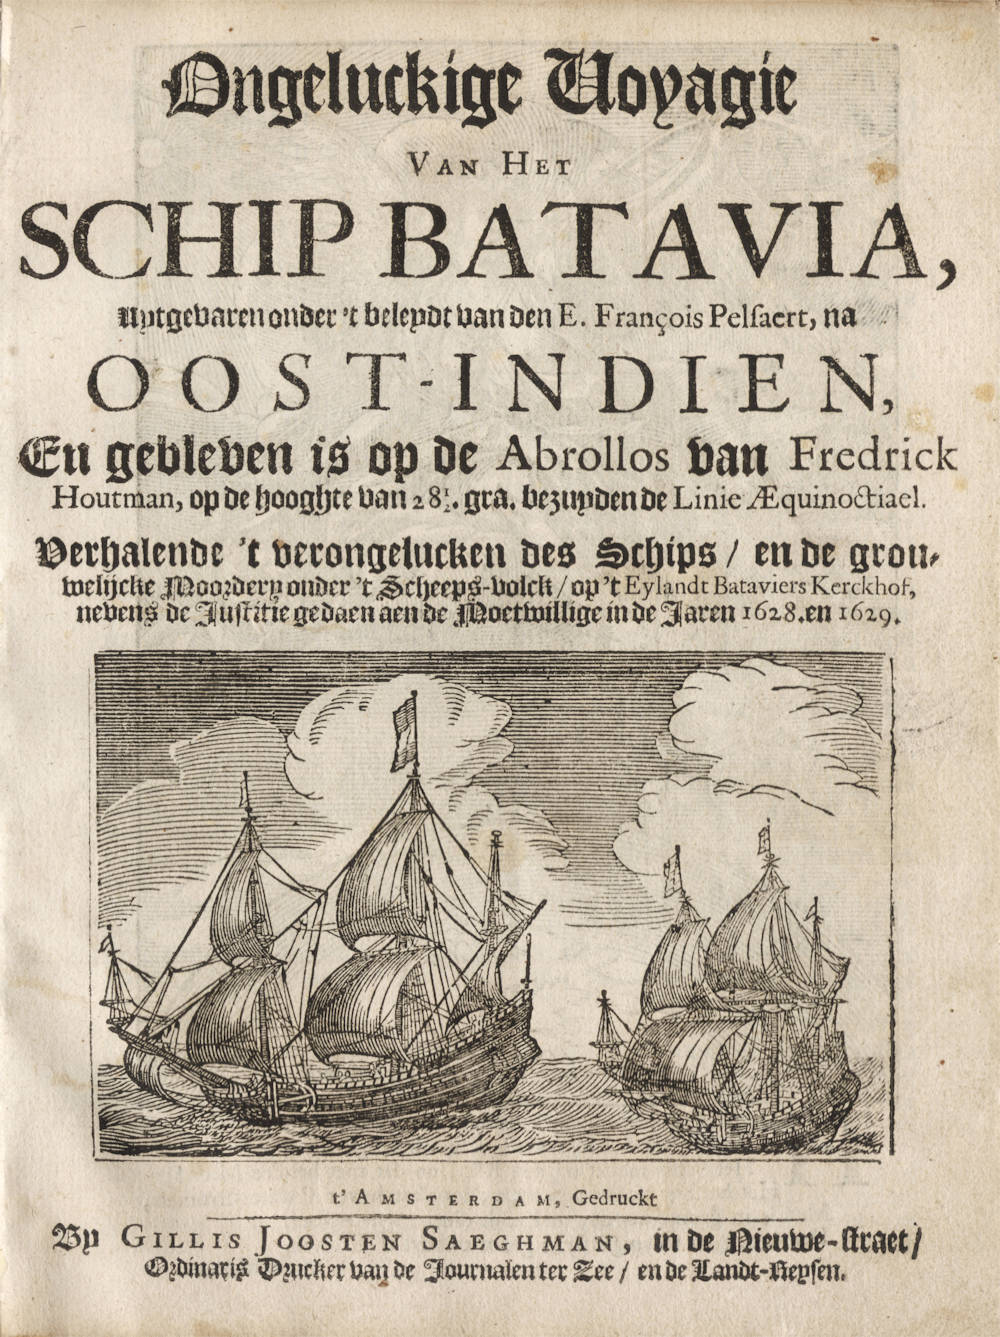 The first book on Australia, in Saeghman 1663 edition, by François Pelsaert